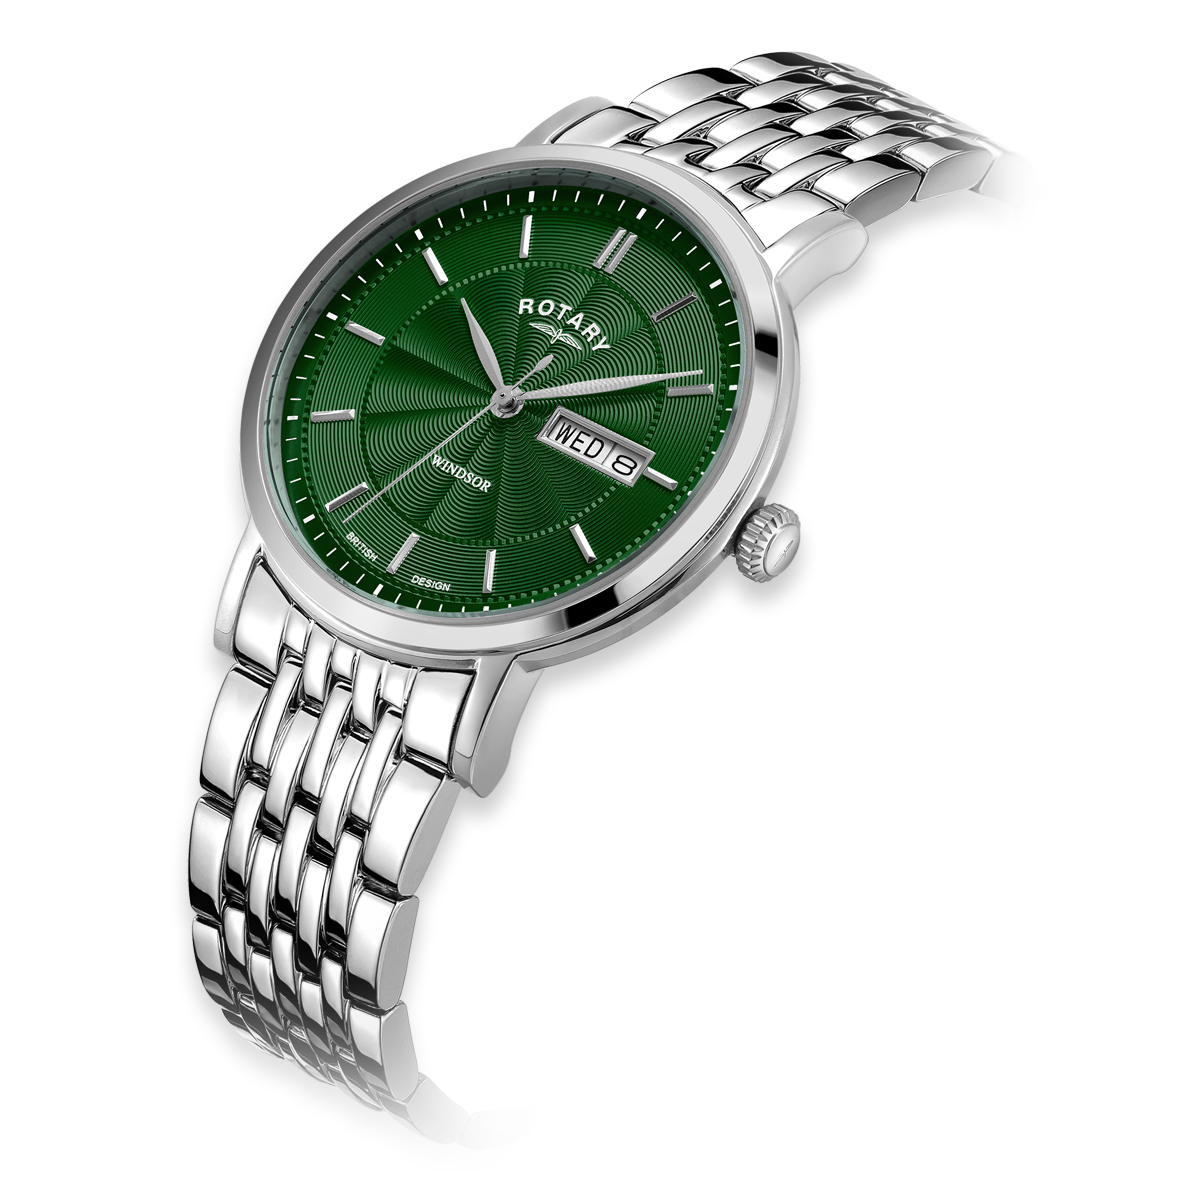 Rotary Windsor Watch, Green Dial with Stainless Steel Bracelet - GB05420/24